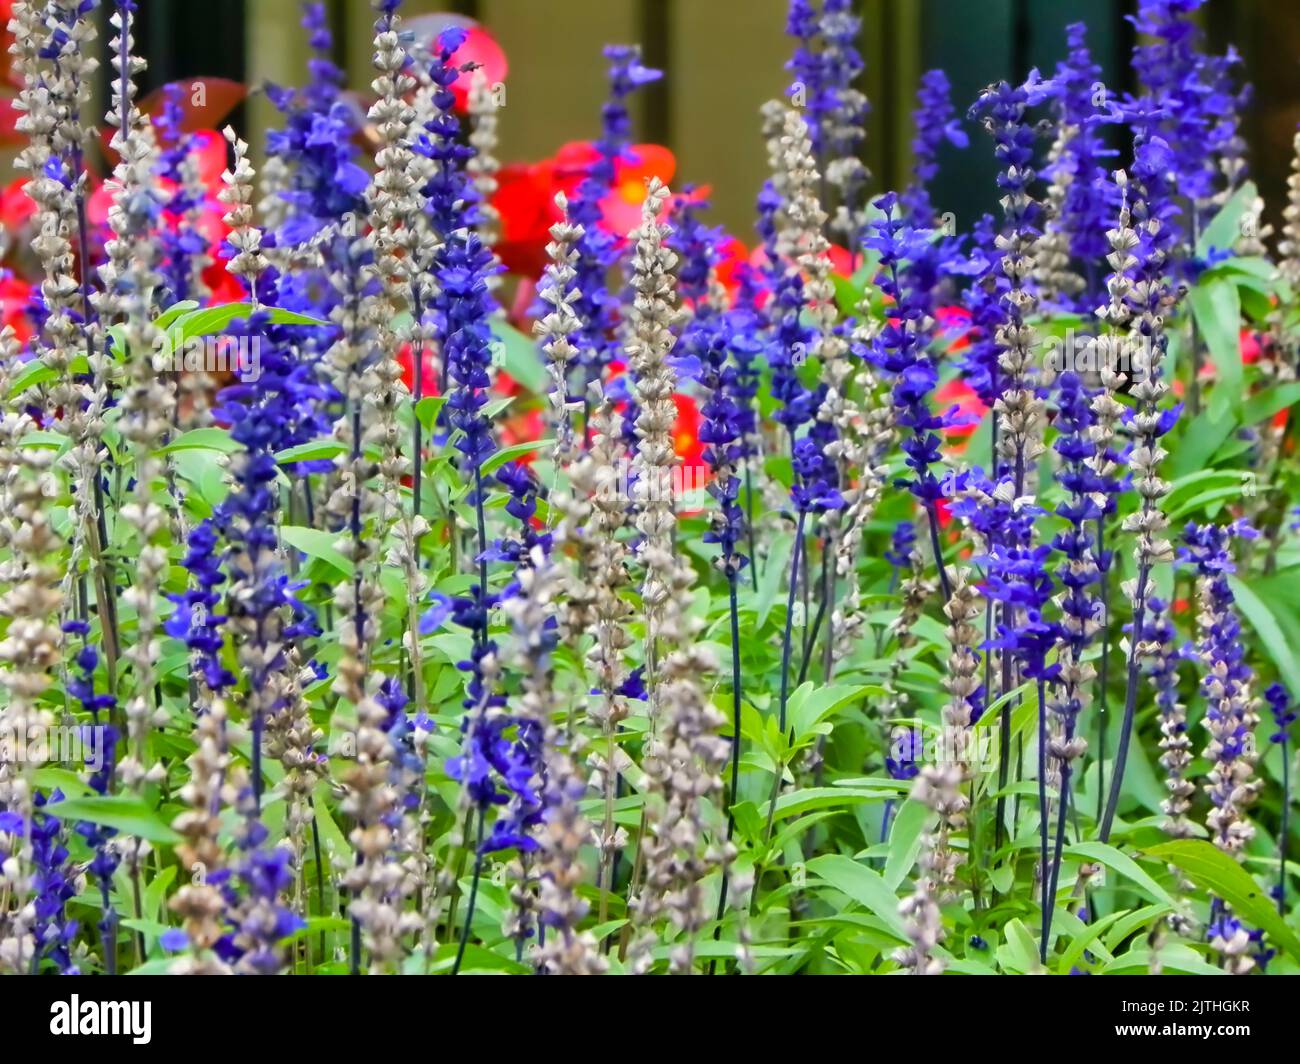 Lavenders blooming in a garden. Stock Photo